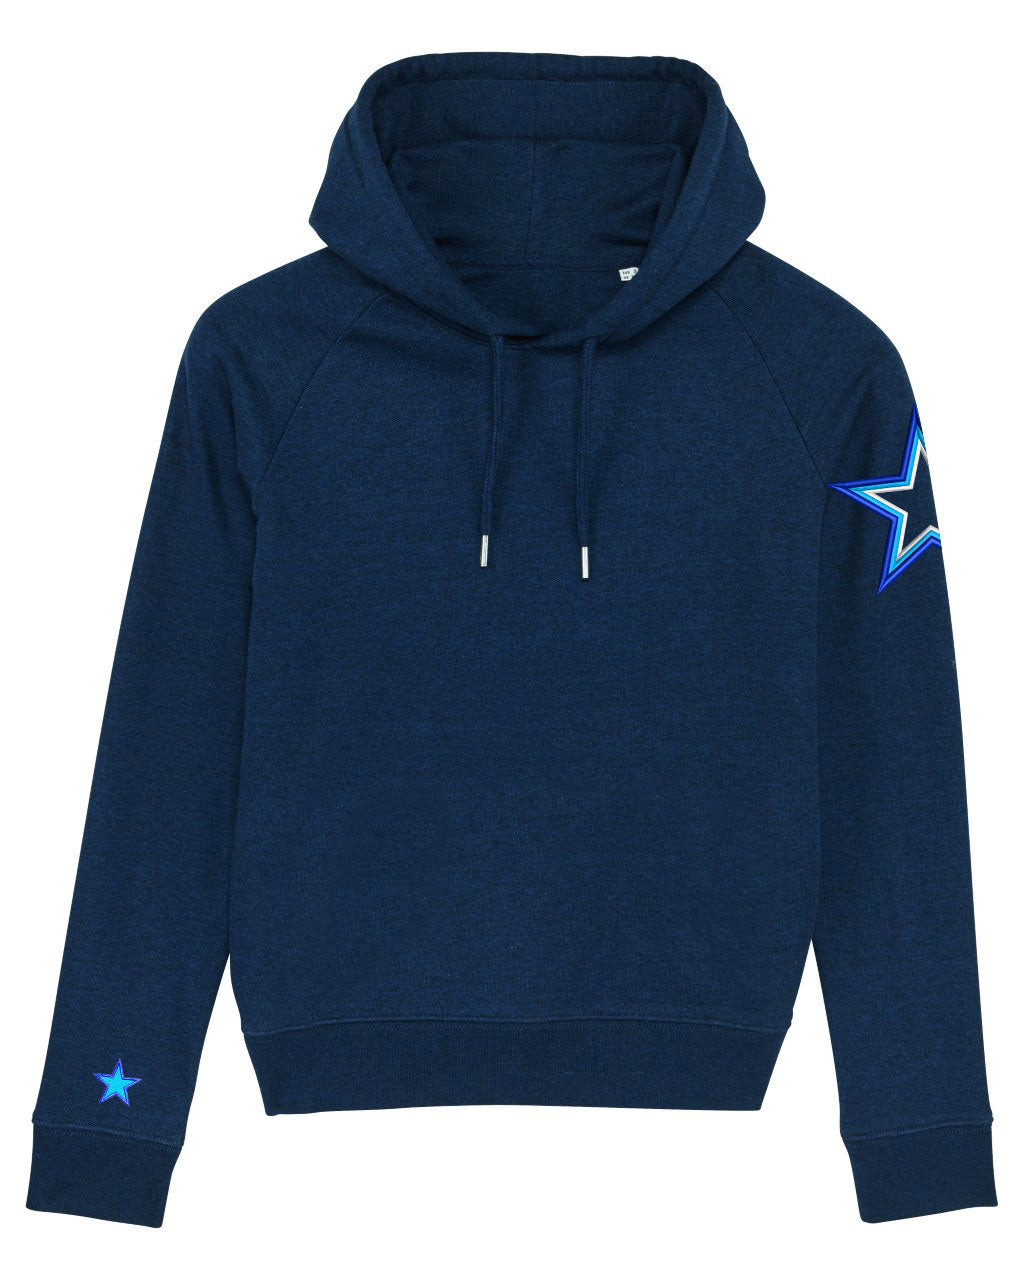 Navy Arm Star Hoodie - MADE TO ORDER